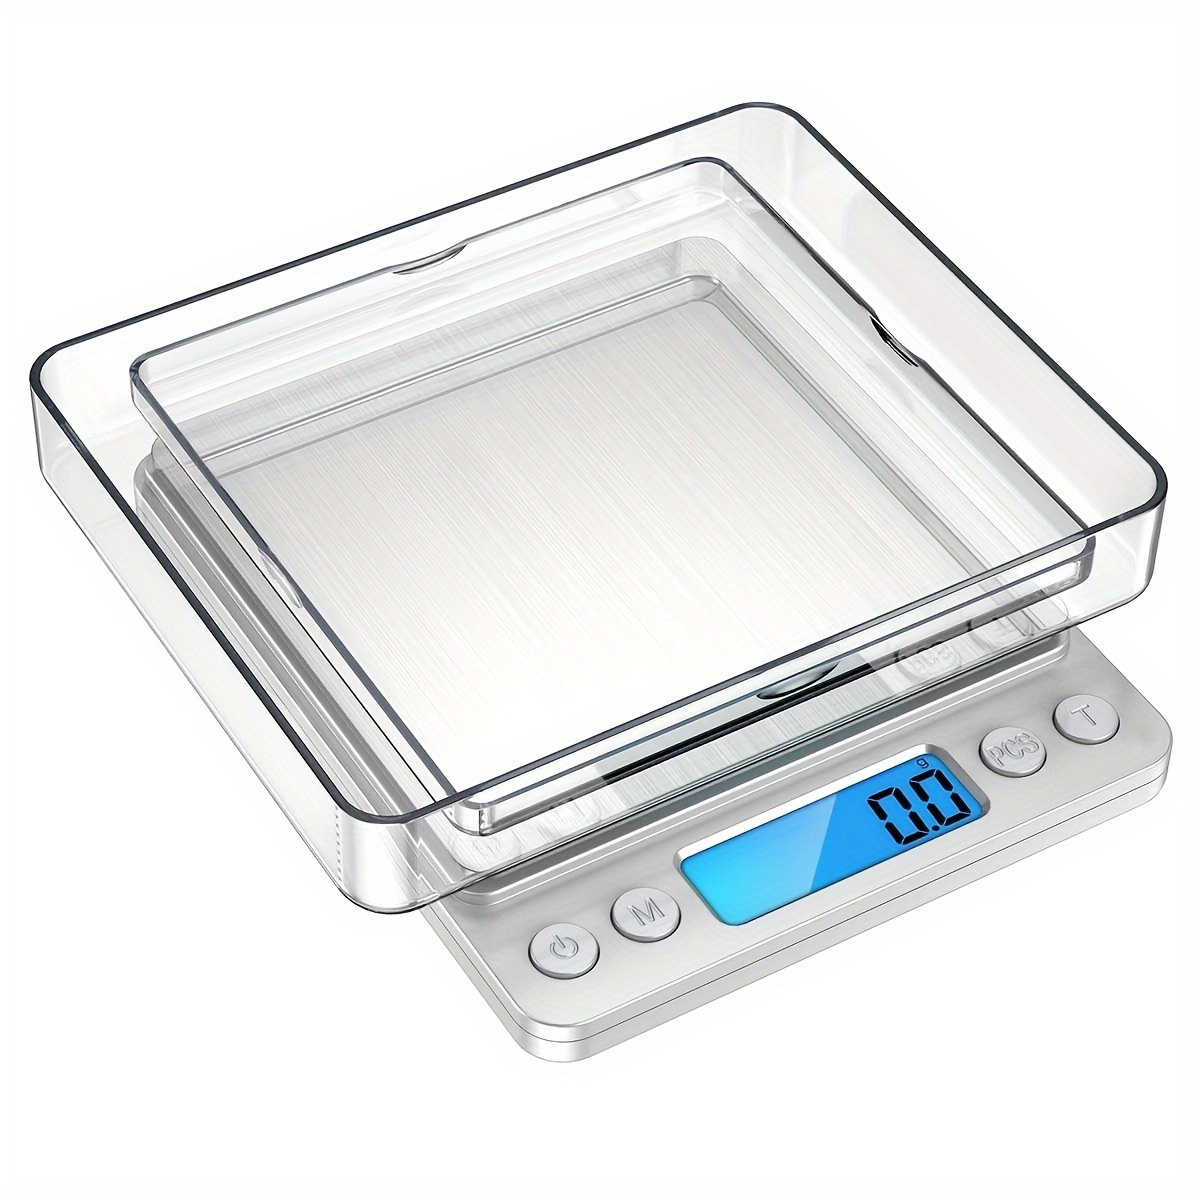 1pc kitchen scale baking food scale coffee scale high precision stainless steel material small gram scale household baking kitchen scale multiple measurement electronic scale 0 001 measurement accuracy details 5